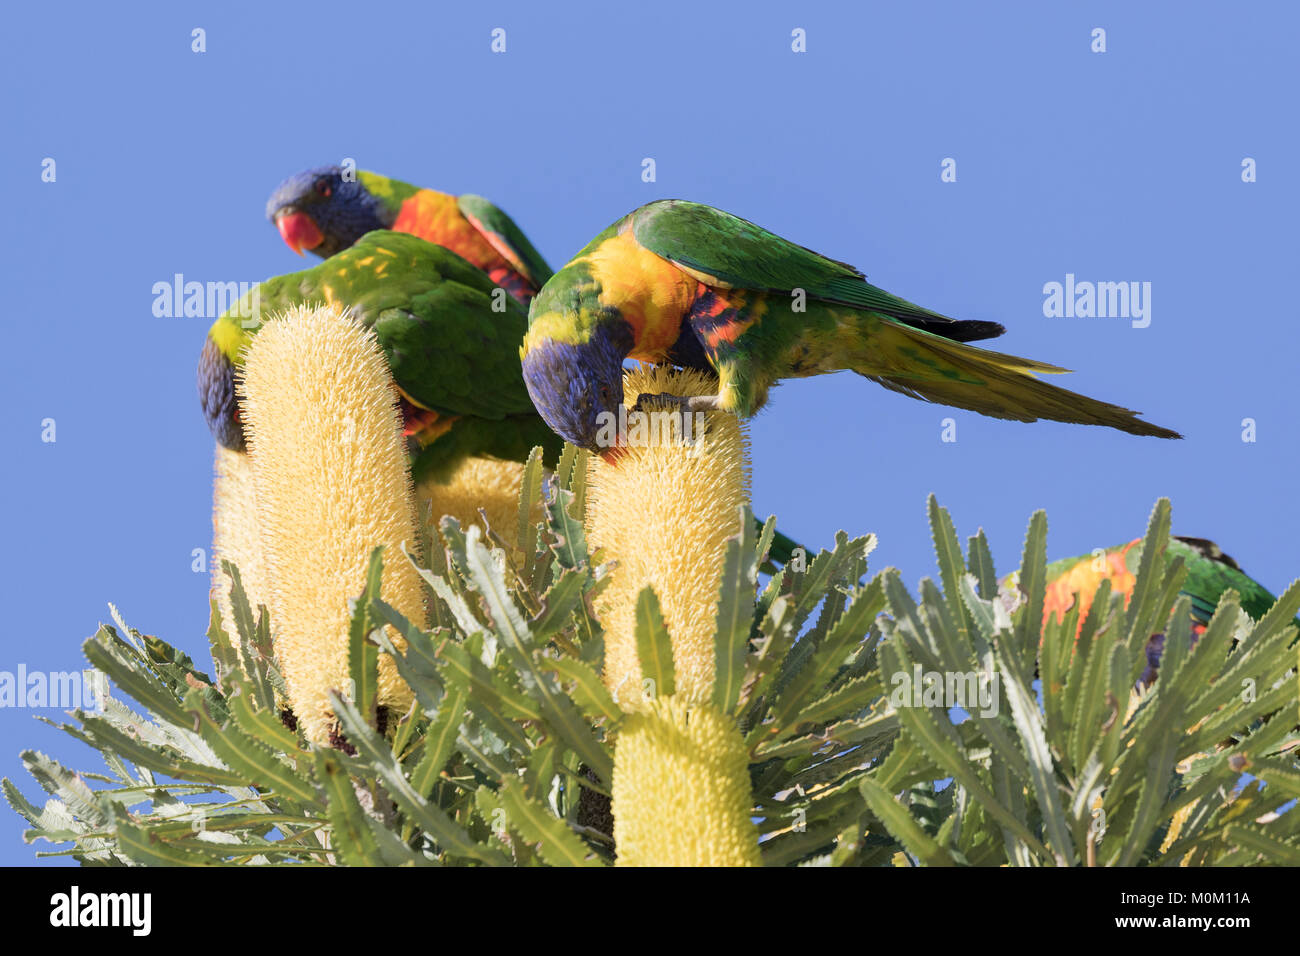 Rainbow Lorikeets (Trichoglossus haematodus) feeding on the seeds of Candle Banksia (Banksia attenuata) in a Perth suburb, Western Australia Stock Photo